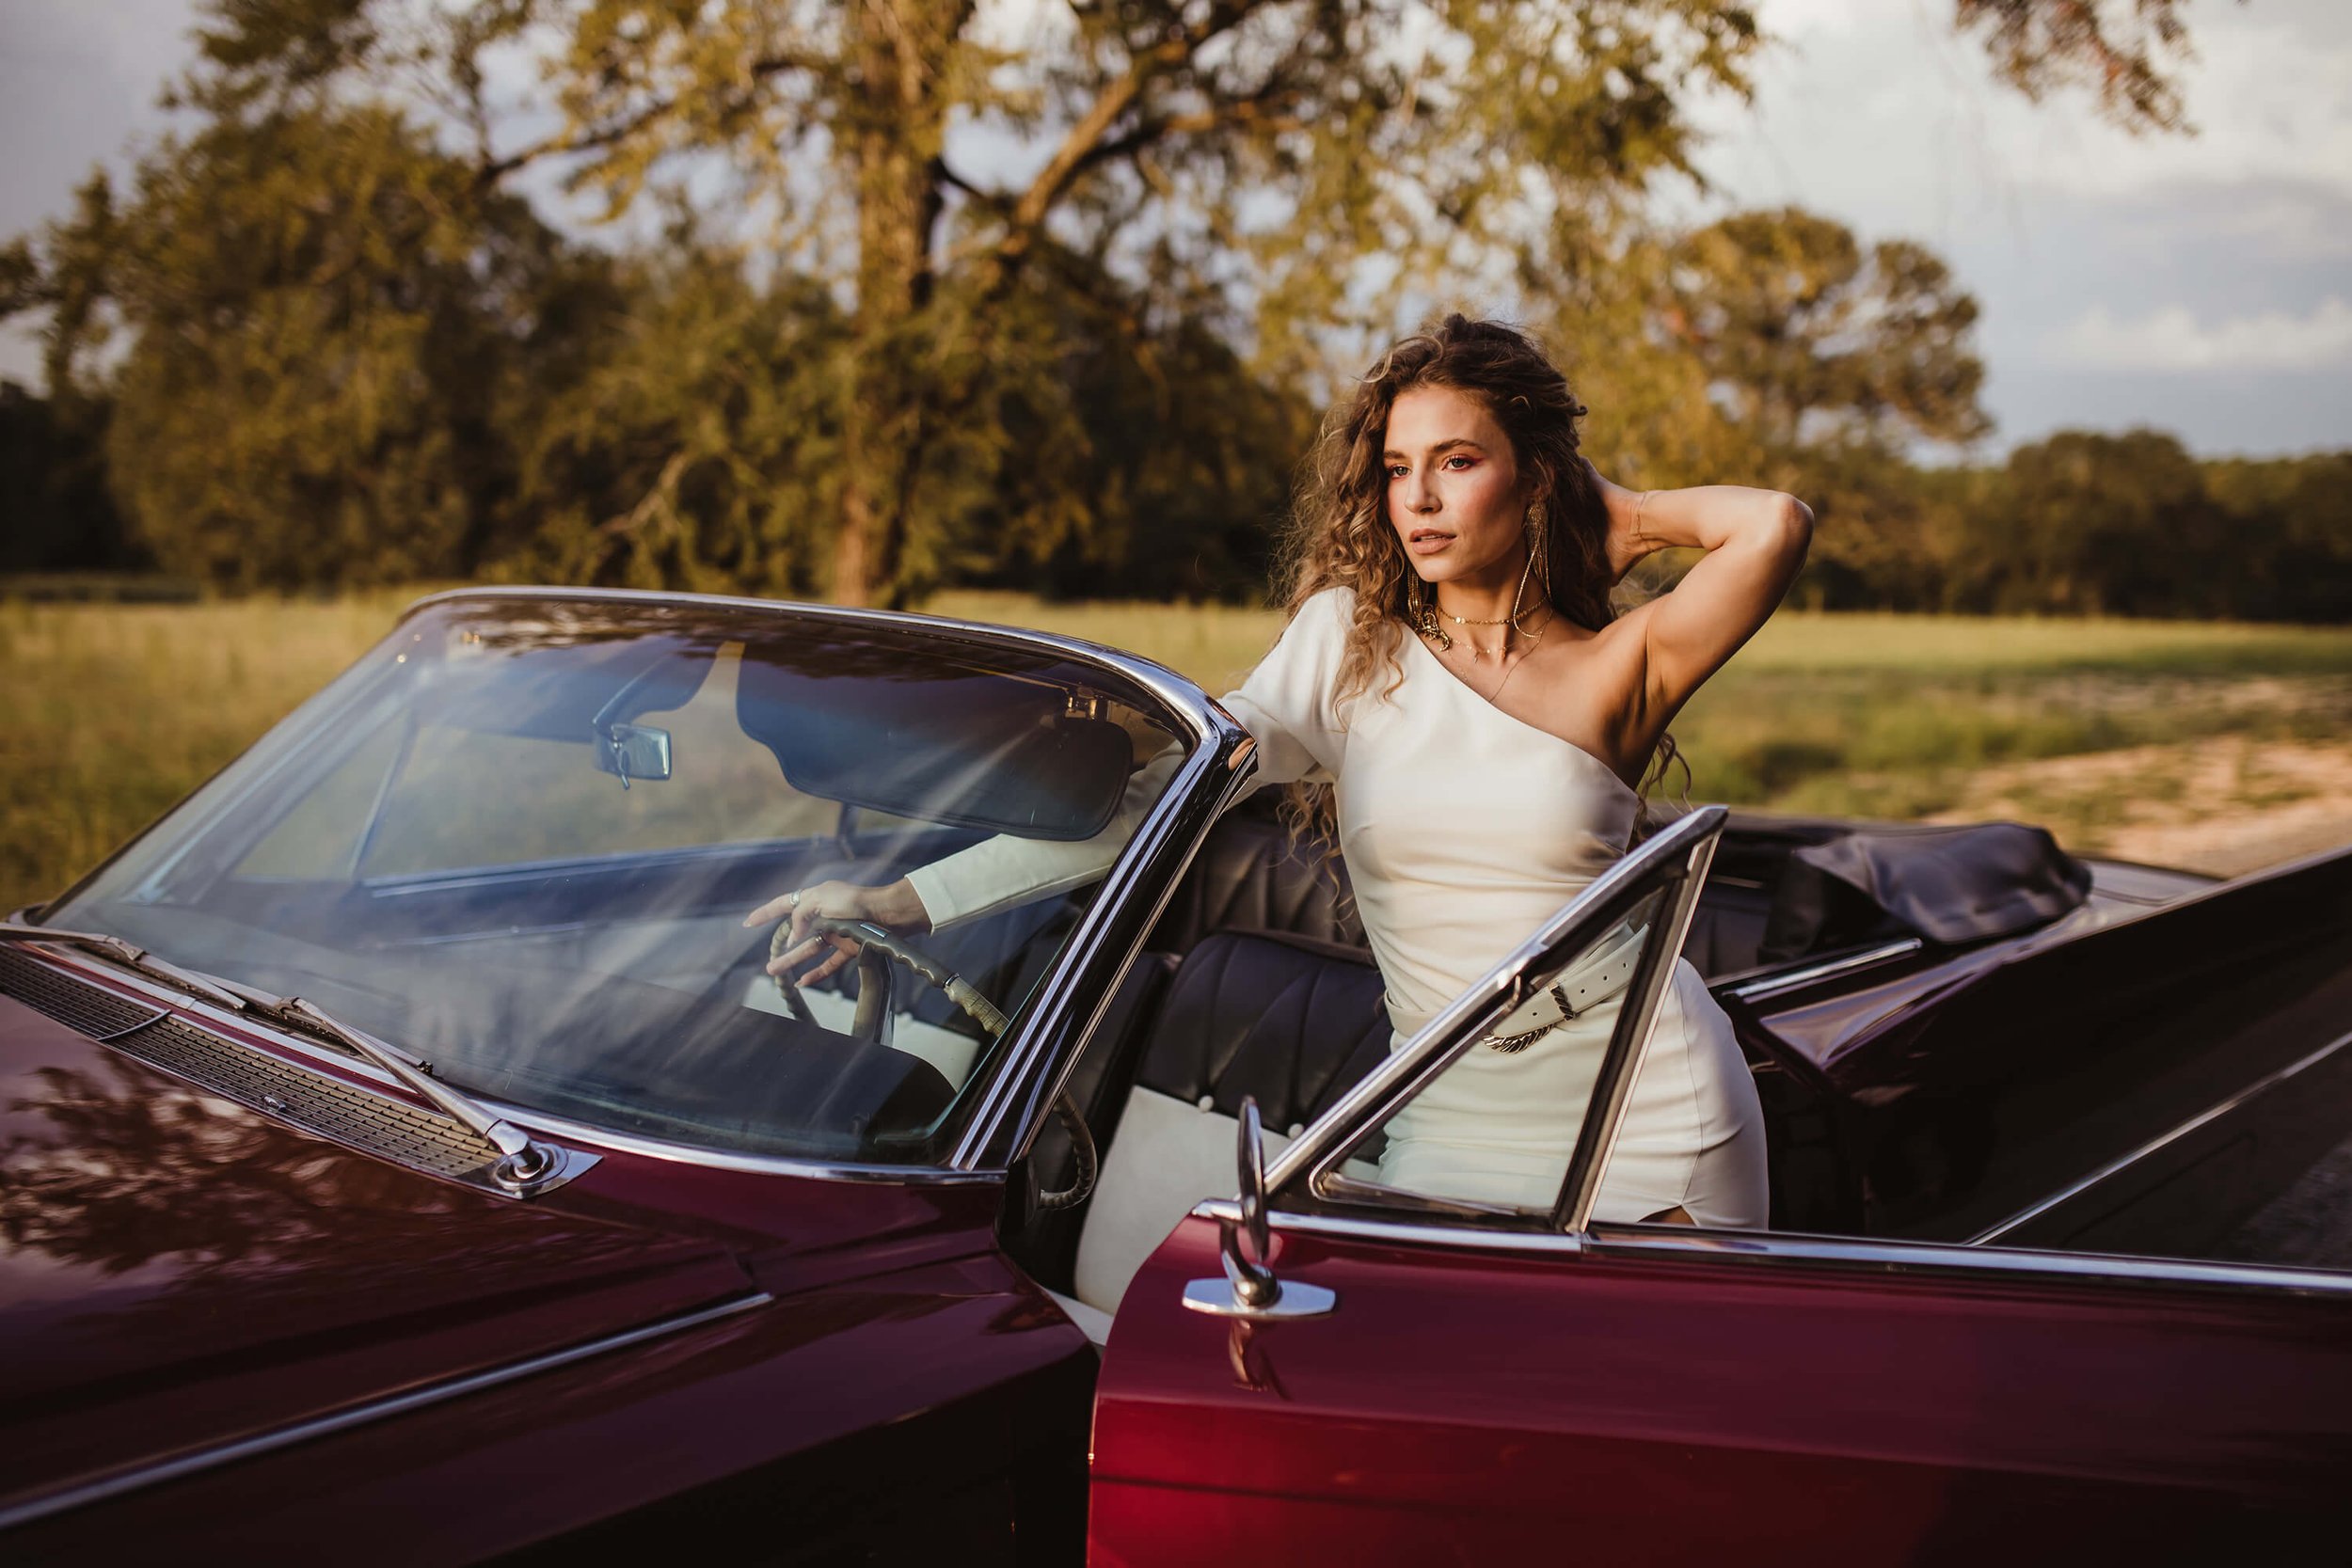 Red Classic Car Girl: Over 2,300 Royalty-Free Licensable Stock Photos |  Shutterstock